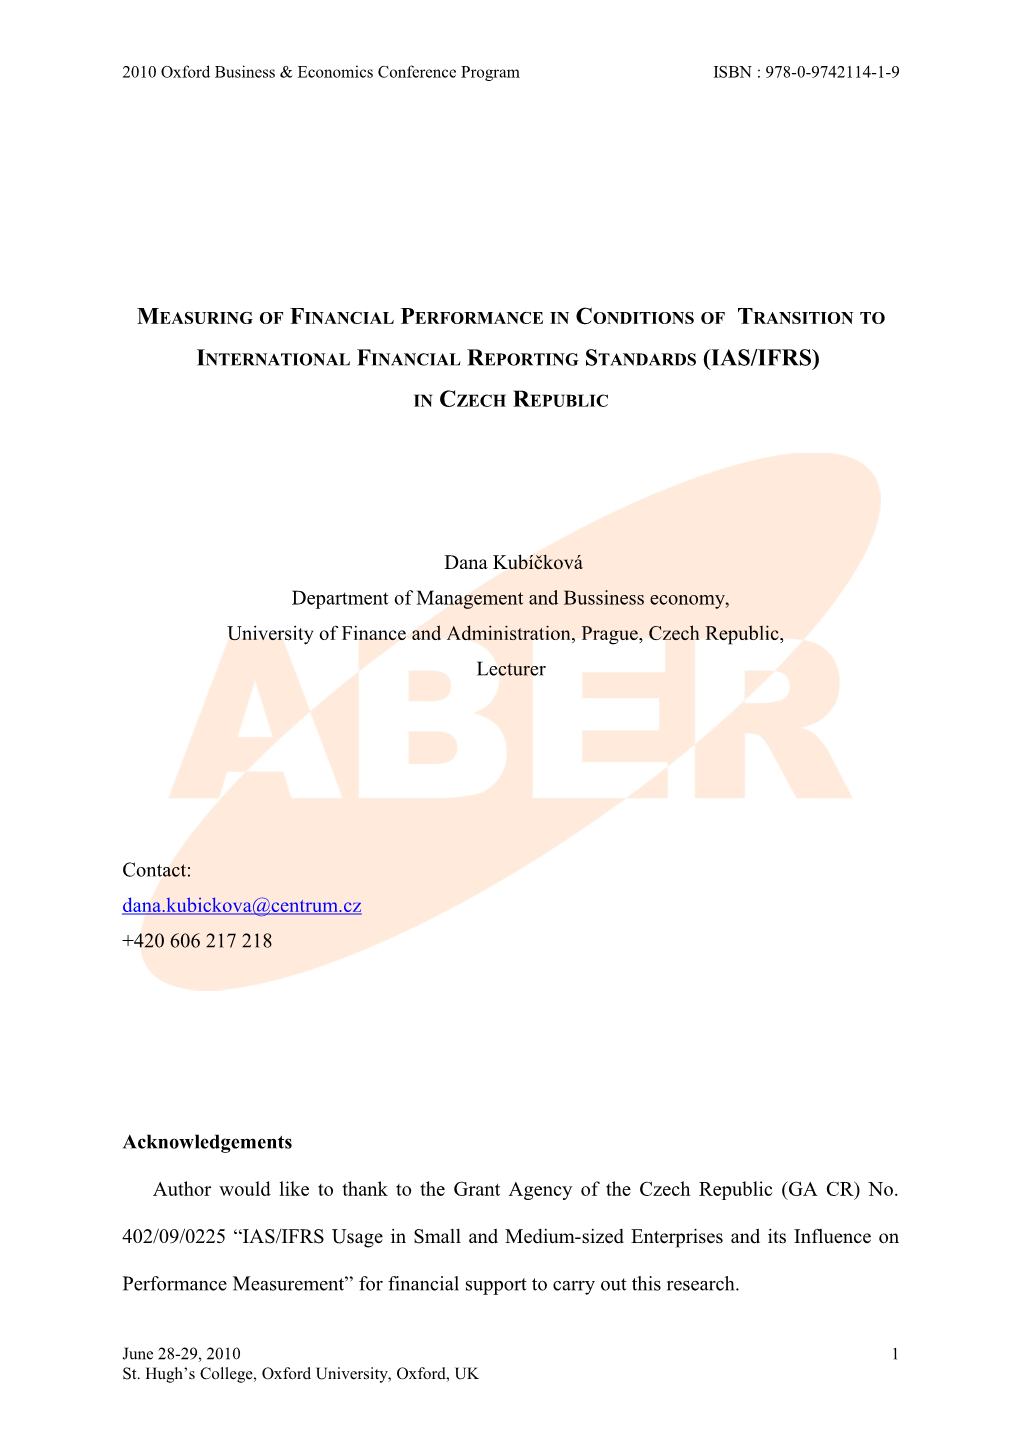 Measuring of Financial Performance in Conditions of Transition to International Financial